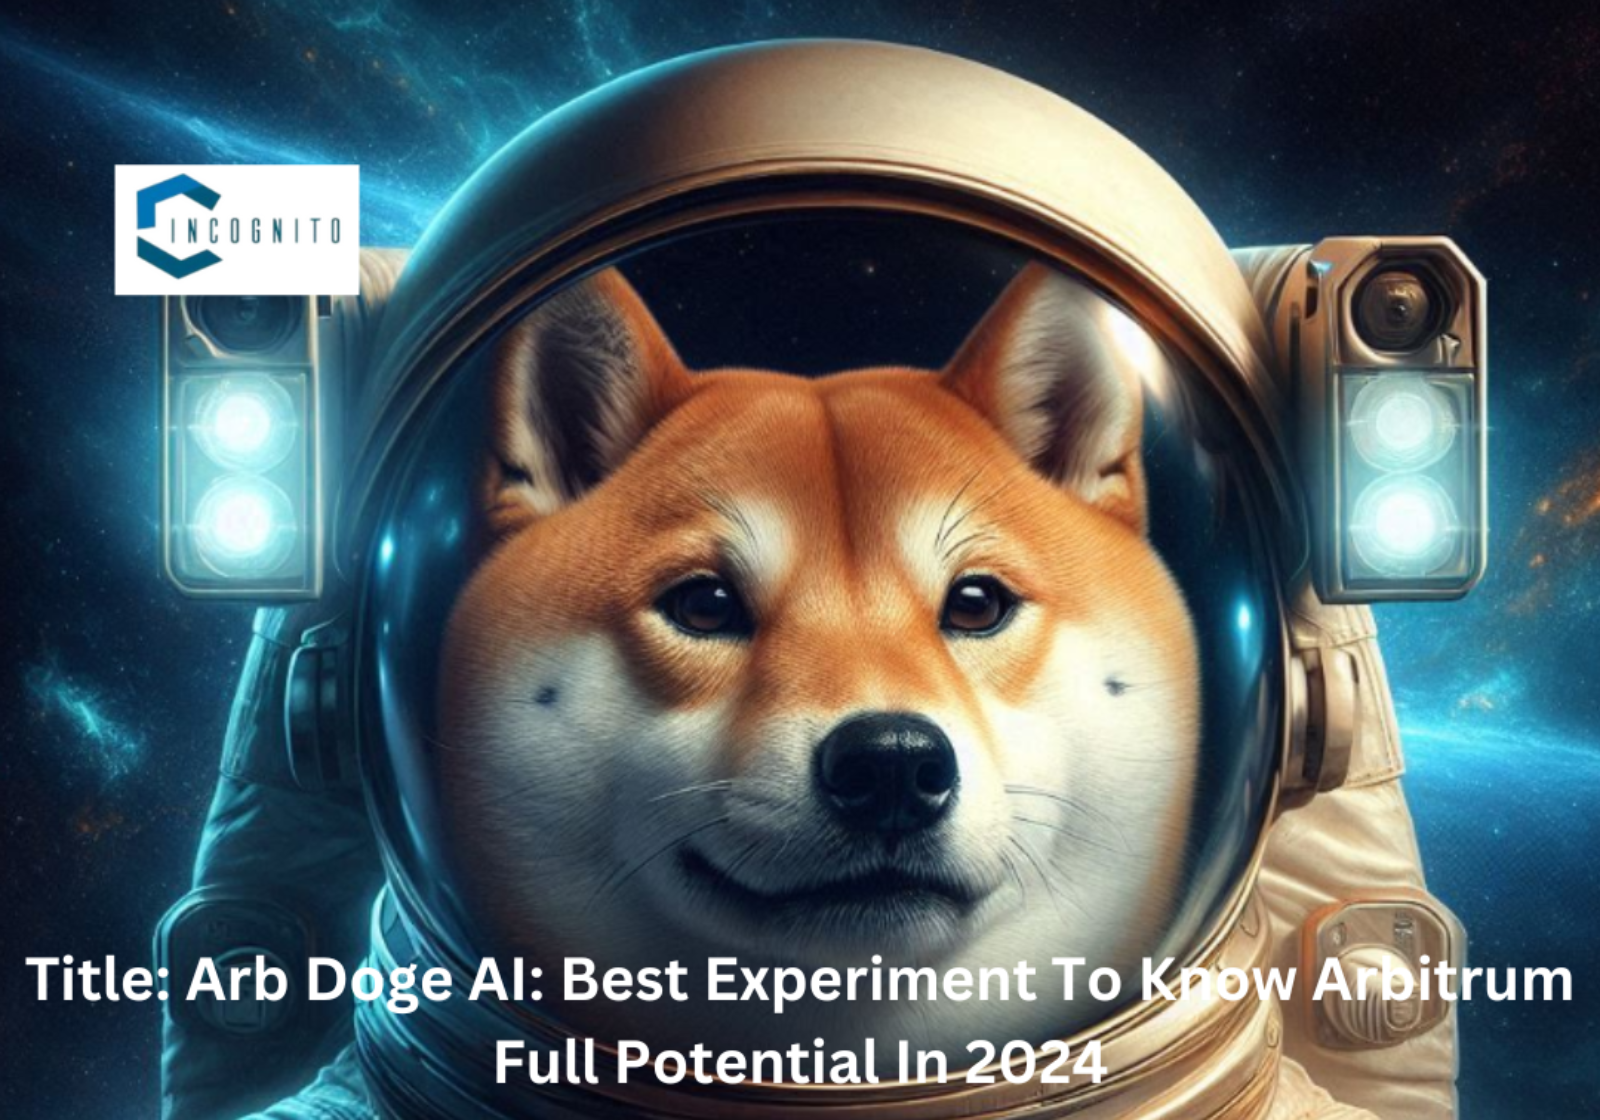 Arb Doge AI: Best Experiment To Know Full Potential Of Arbitrum In 2024